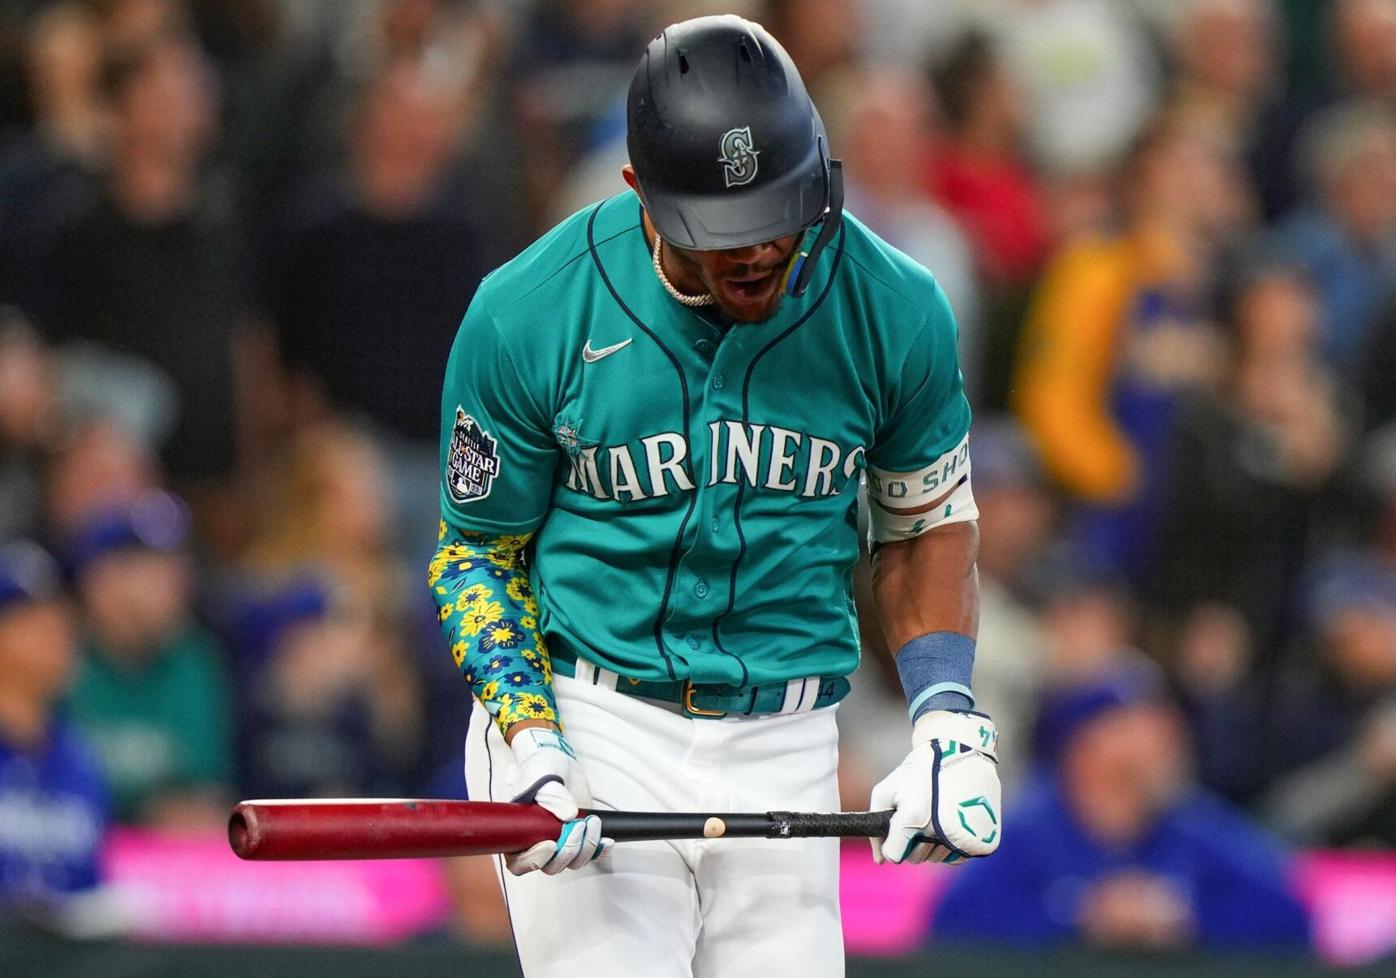 Clutch hits elude Mariners in loss to Rangers